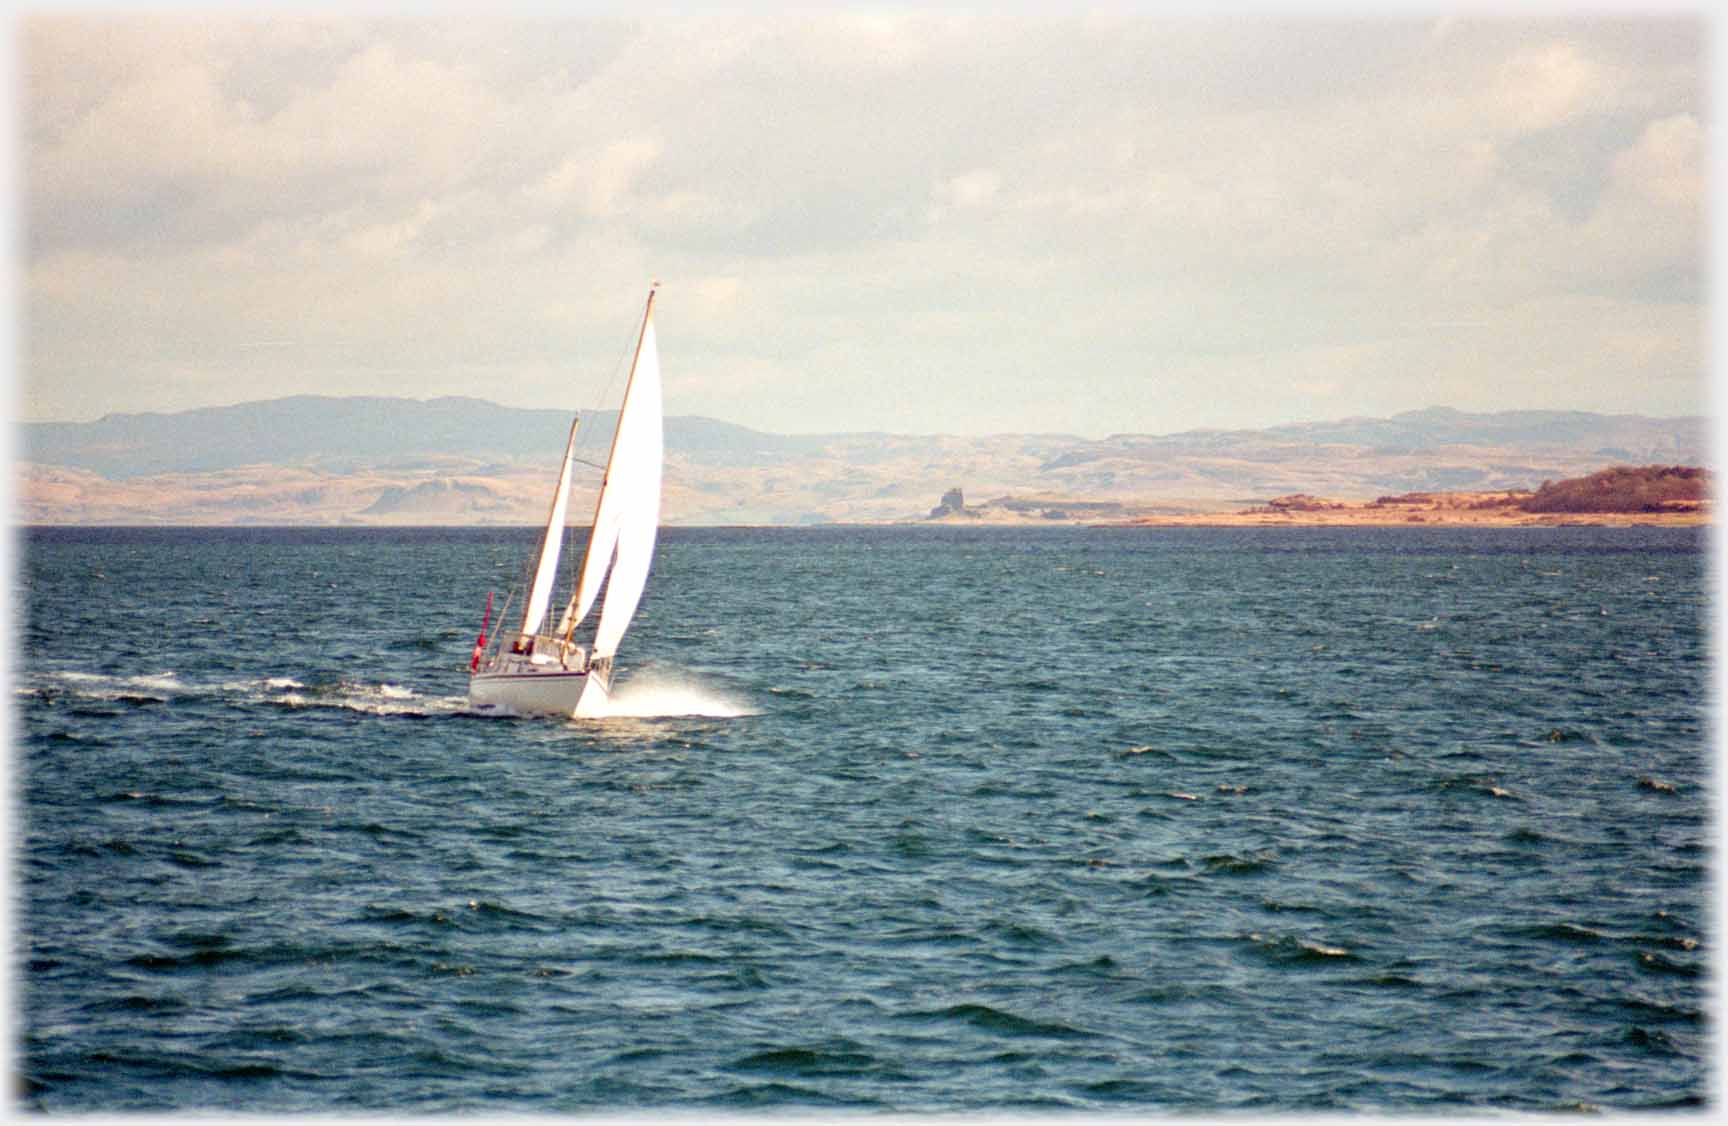 Yacht tilted by wind as it sails.